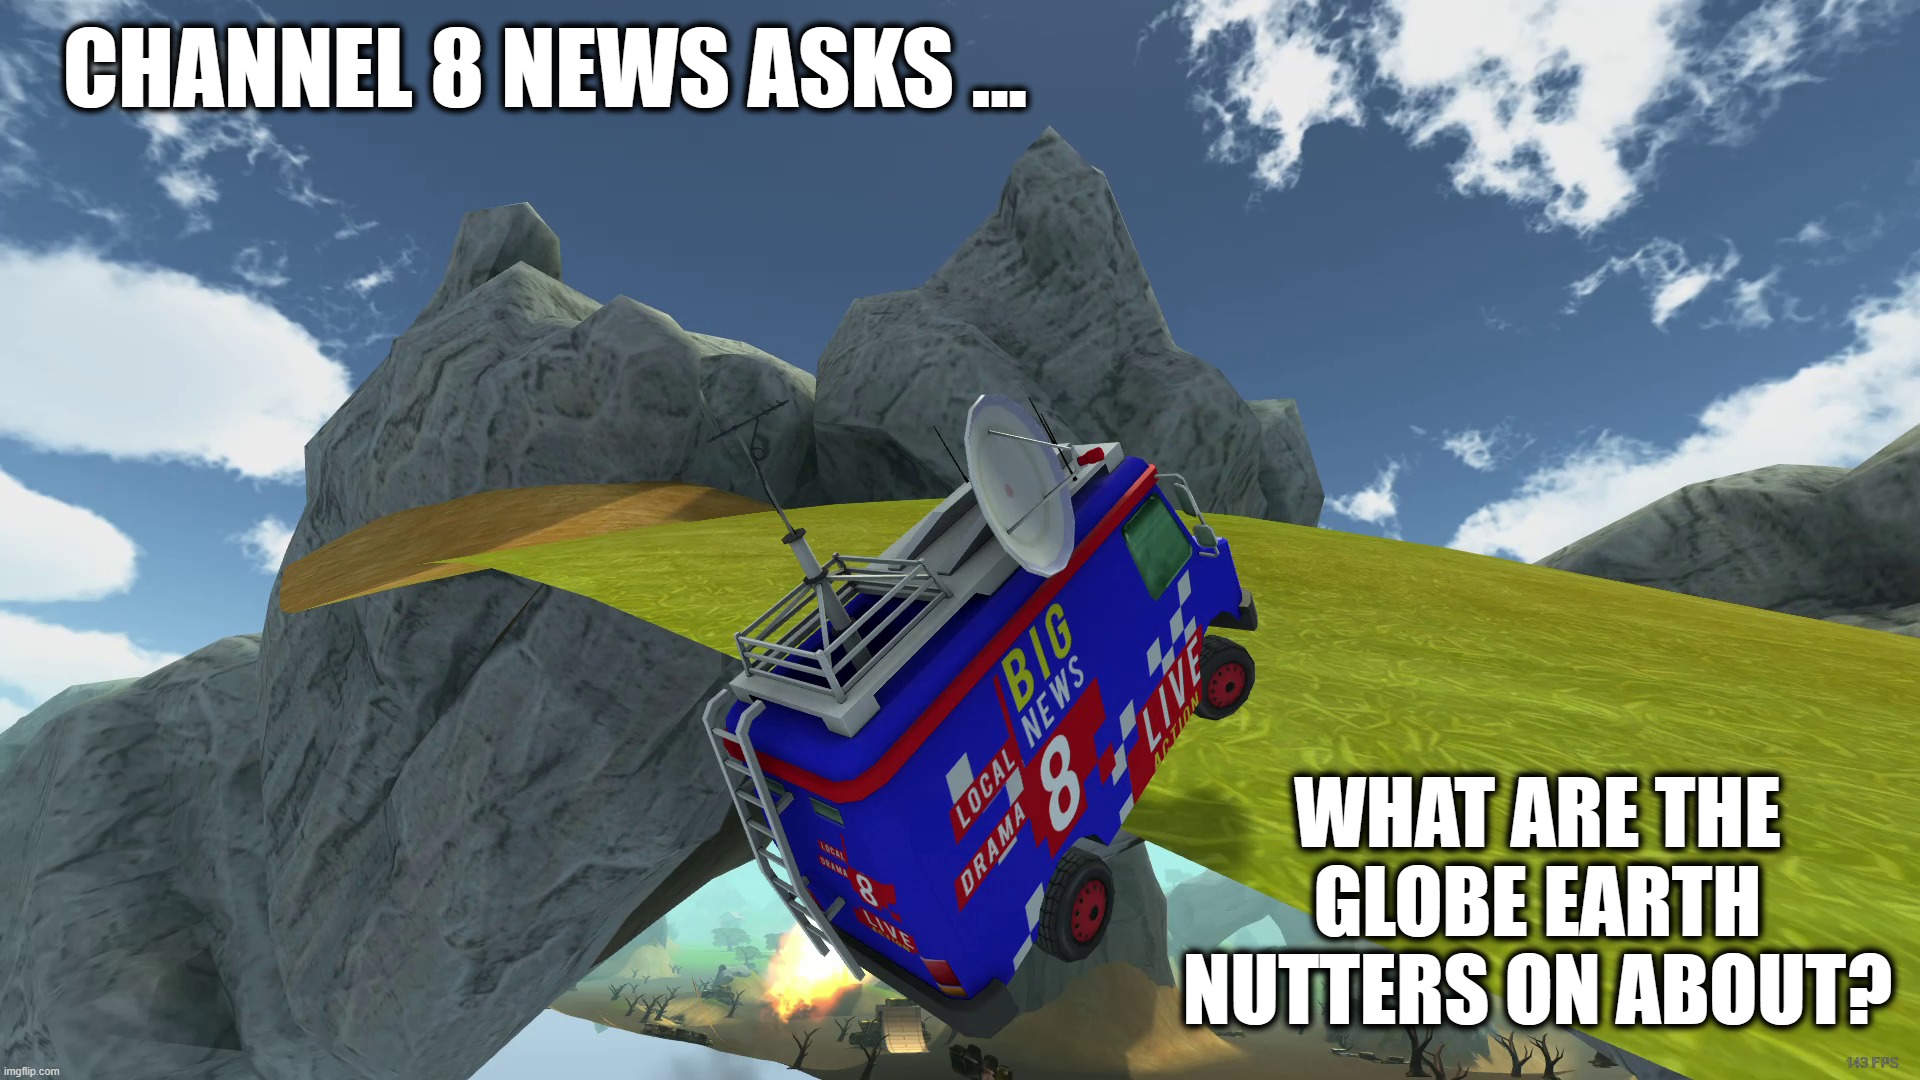 what are the globe earth nutters on about? | CHANNEL 8 NEWS ASKS ... WHAT ARE THE GLOBE EARTH NUTTERS ON ABOUT? | image tagged in flat earth,globe | made w/ Imgflip meme maker